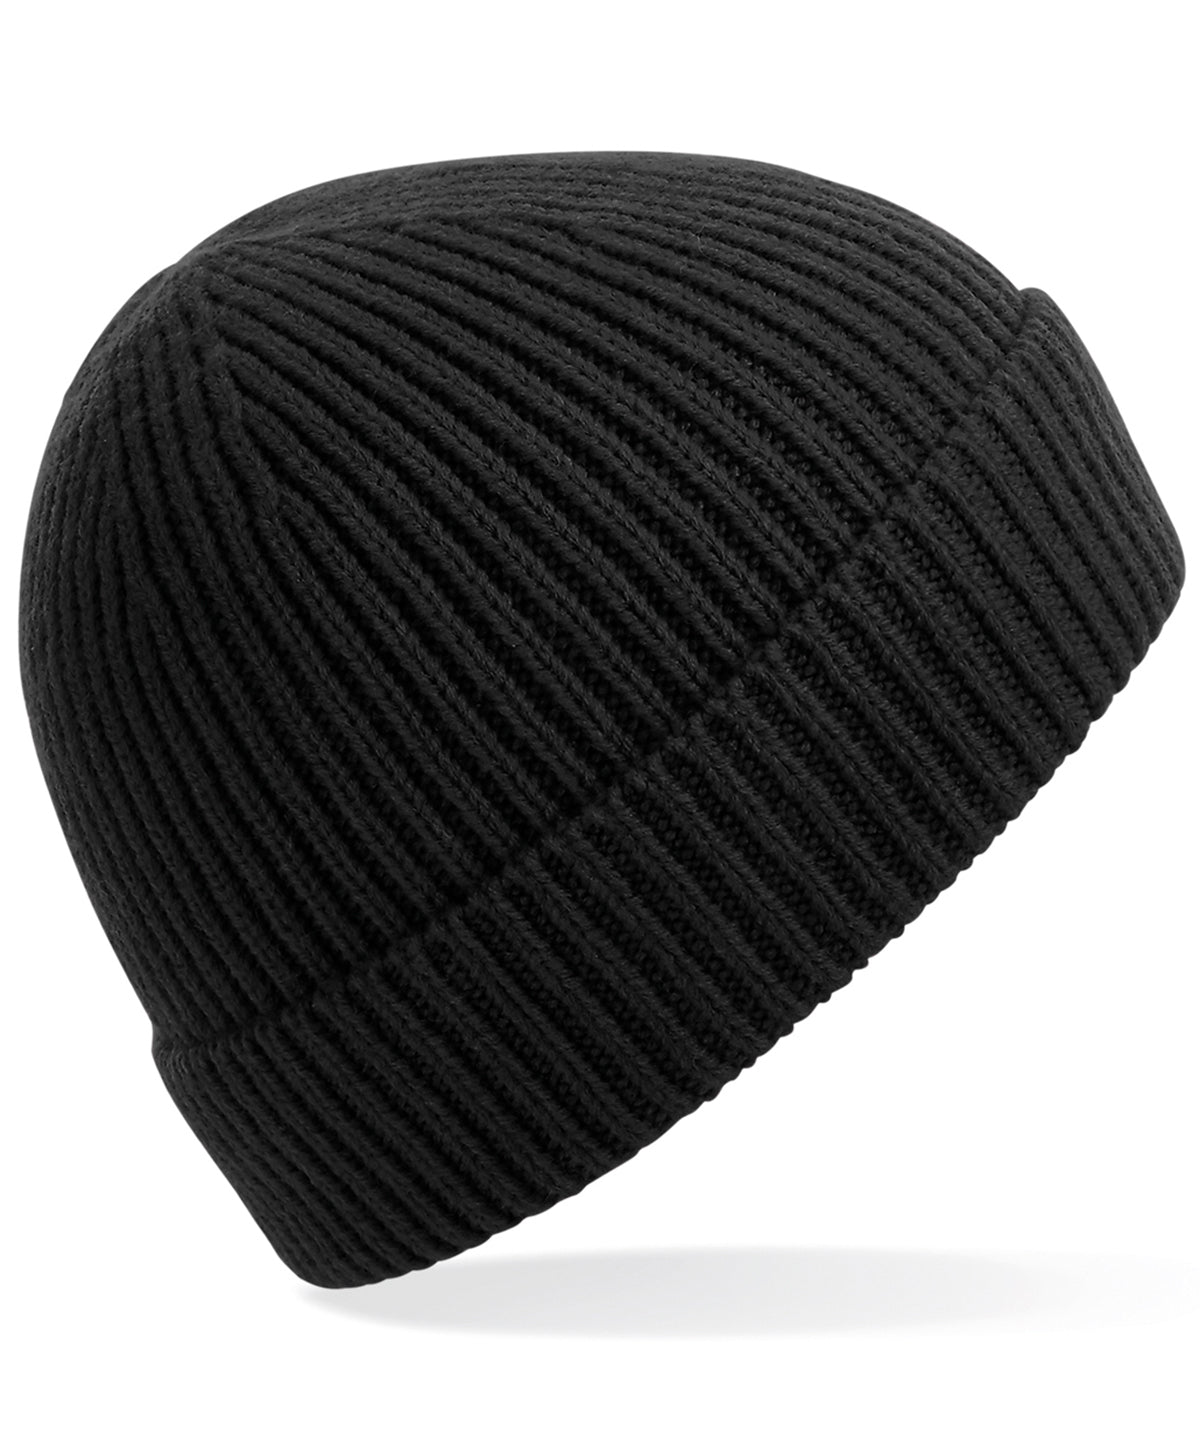 Personalised Hats - Black Beechfield Engineered knit ribbed beanie